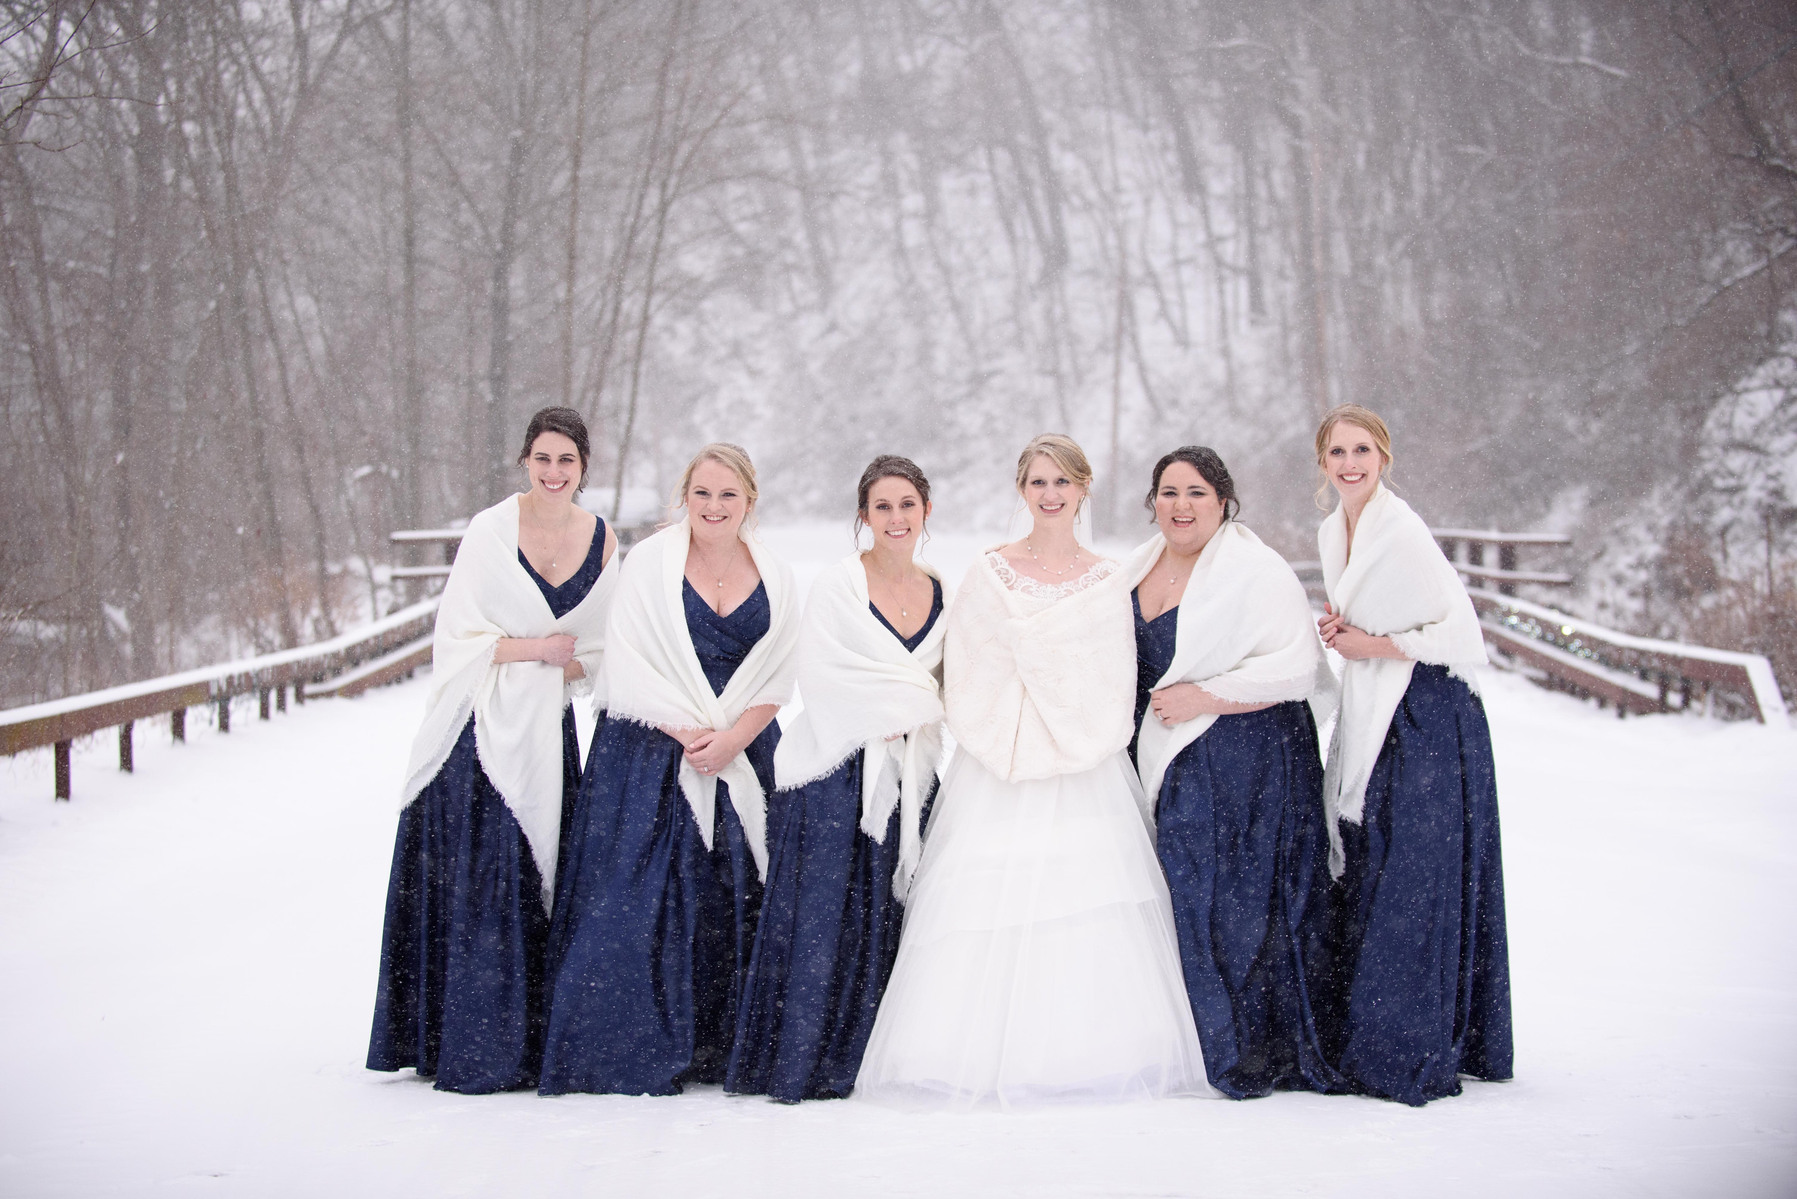 Winter wedding at Glendoveers, Penfield NY